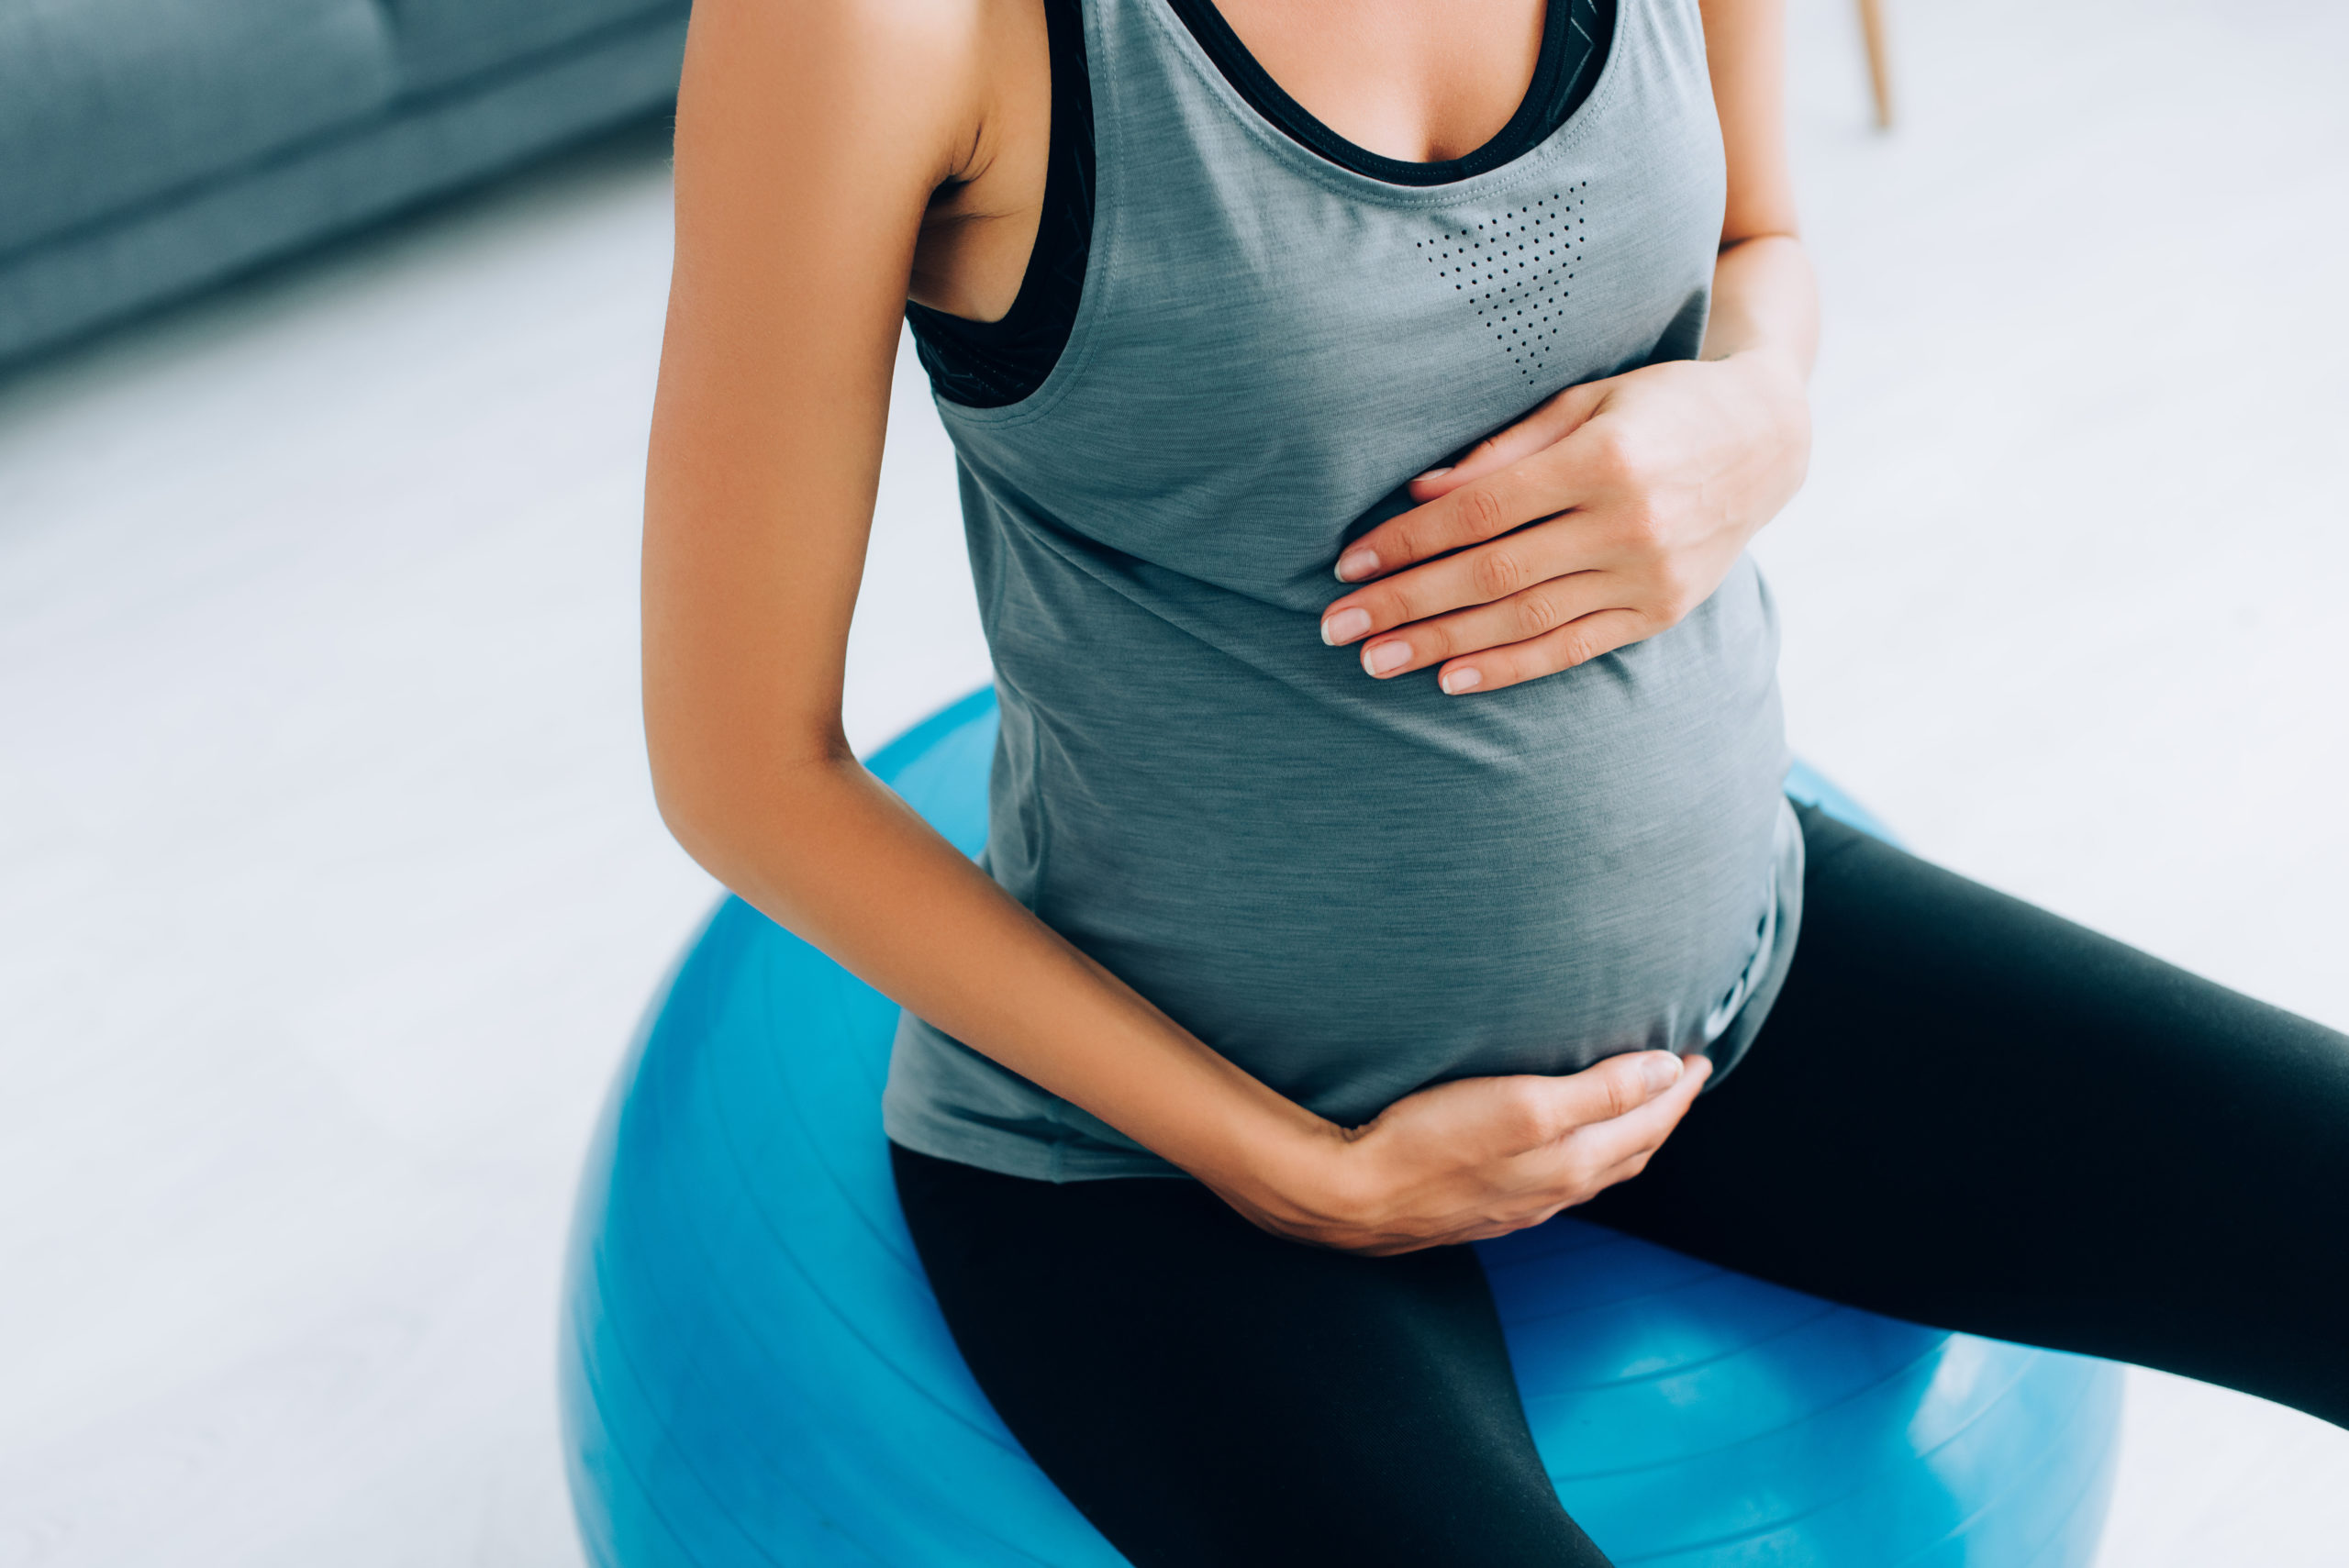 What Kind of Exercise Can I Do When I'm Pregnant?